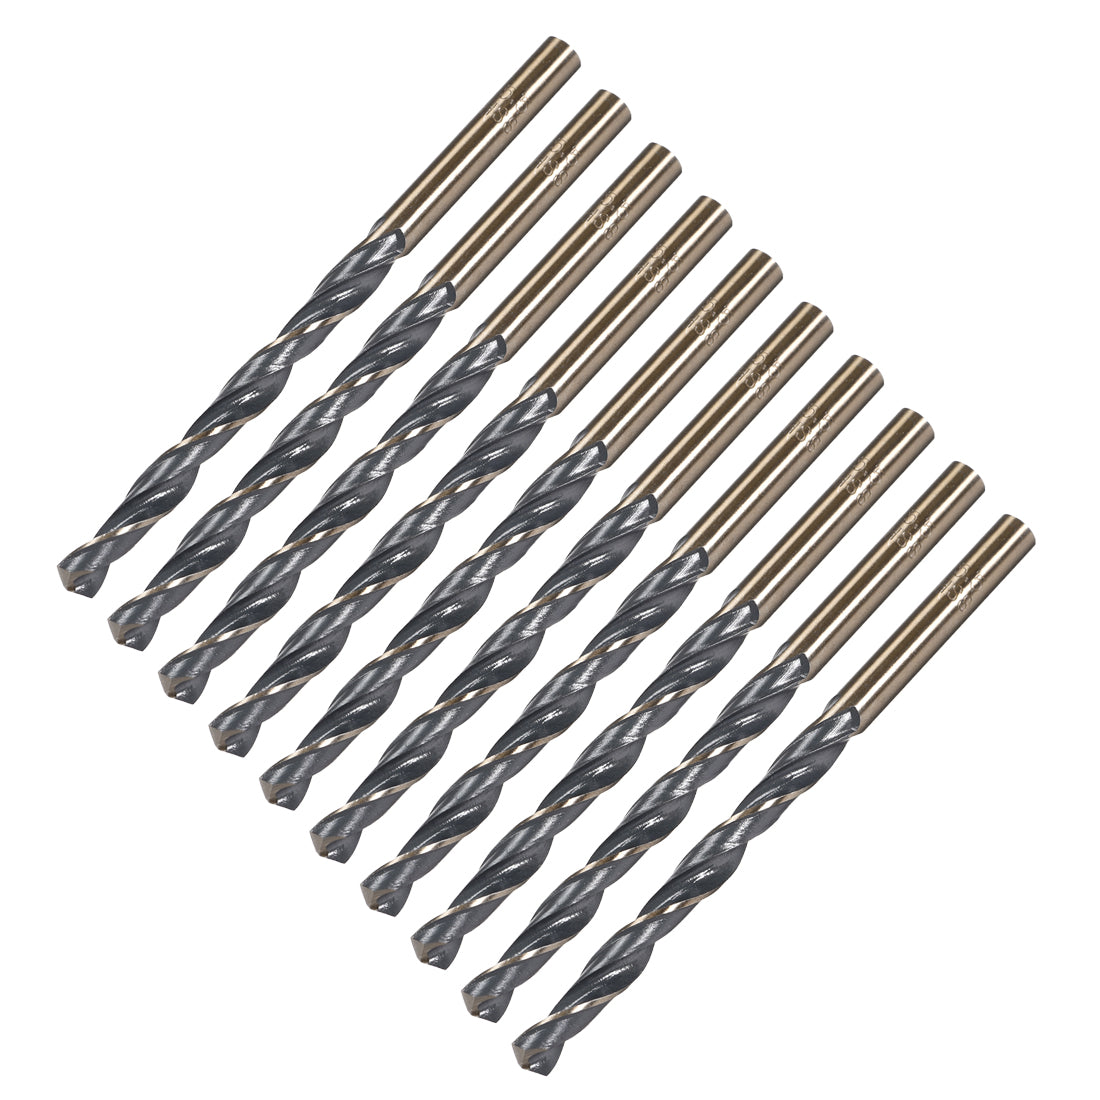 uxcell Uxcell Straight Shank Twist Drill Bits 5.5mm HSS 4341 with 5.5mm Shank 10 Pcs